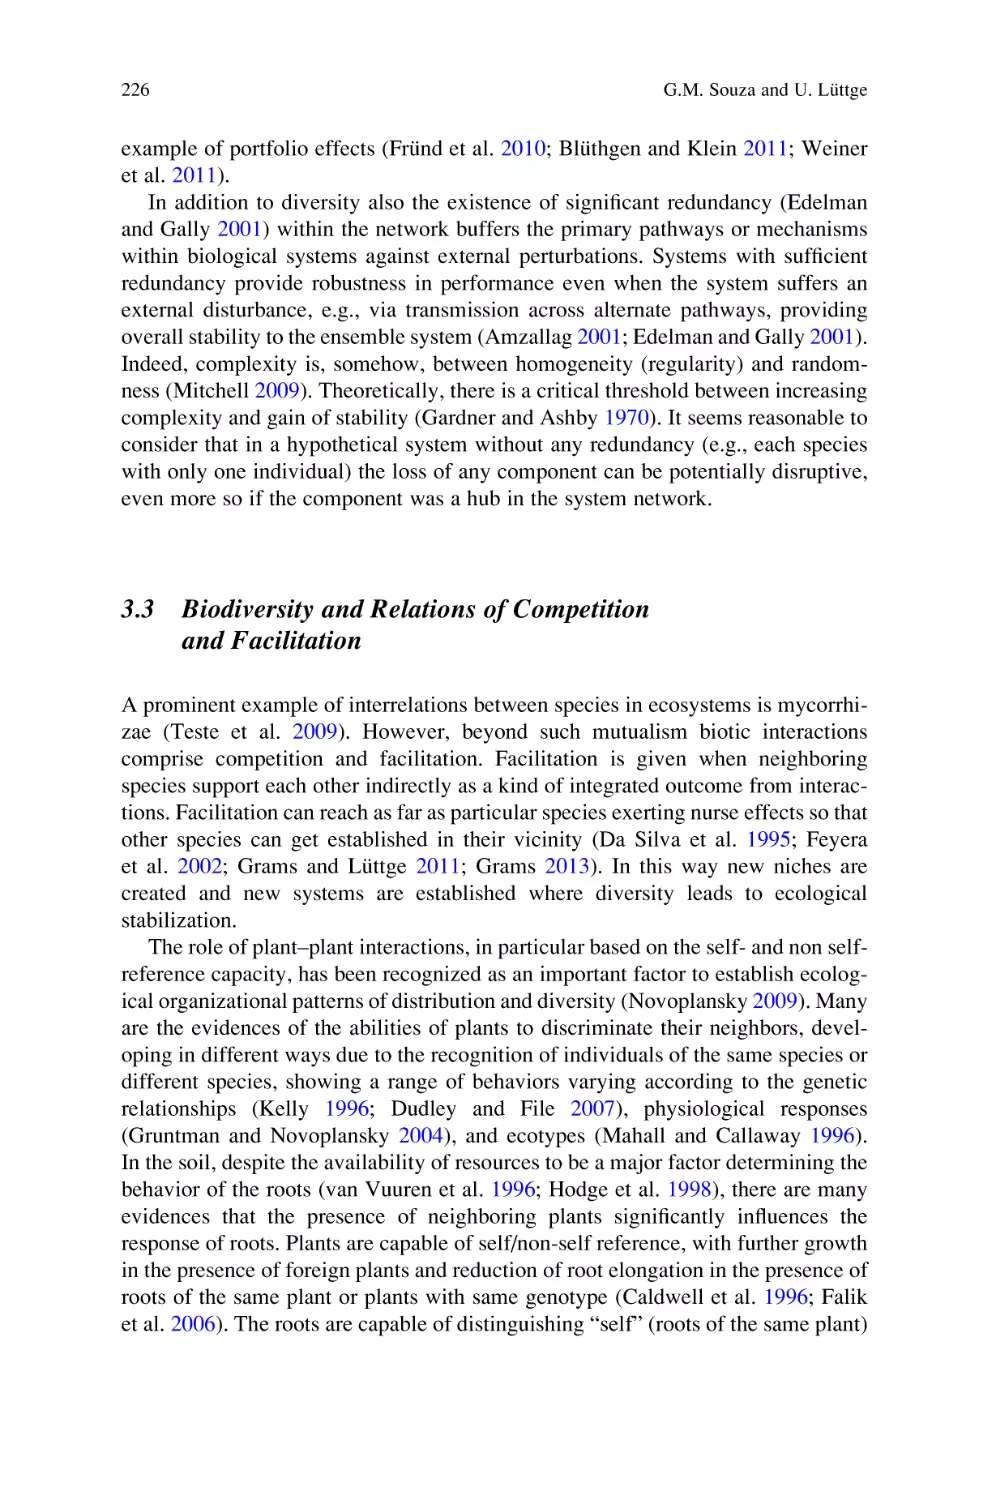 3.3 Biodiversity and Relations of Competition and Facilitation